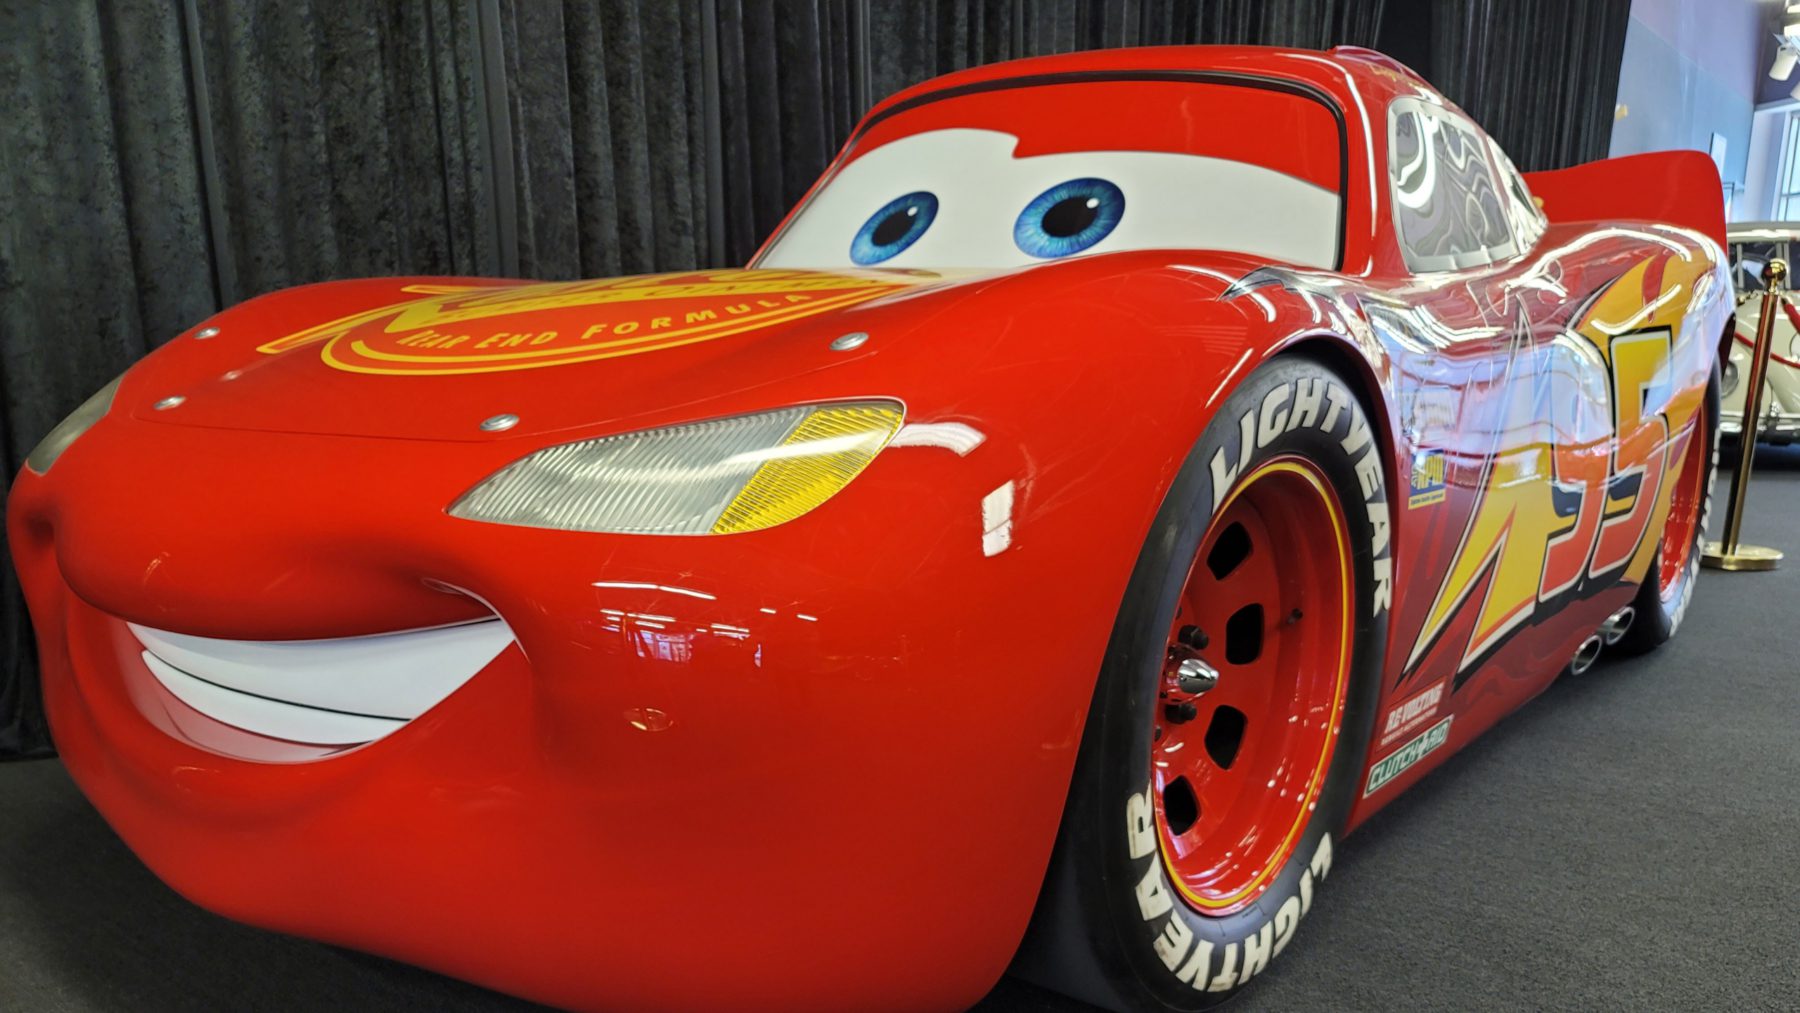 Lightning McQueen and Tow Mater at the National Automobile Museum